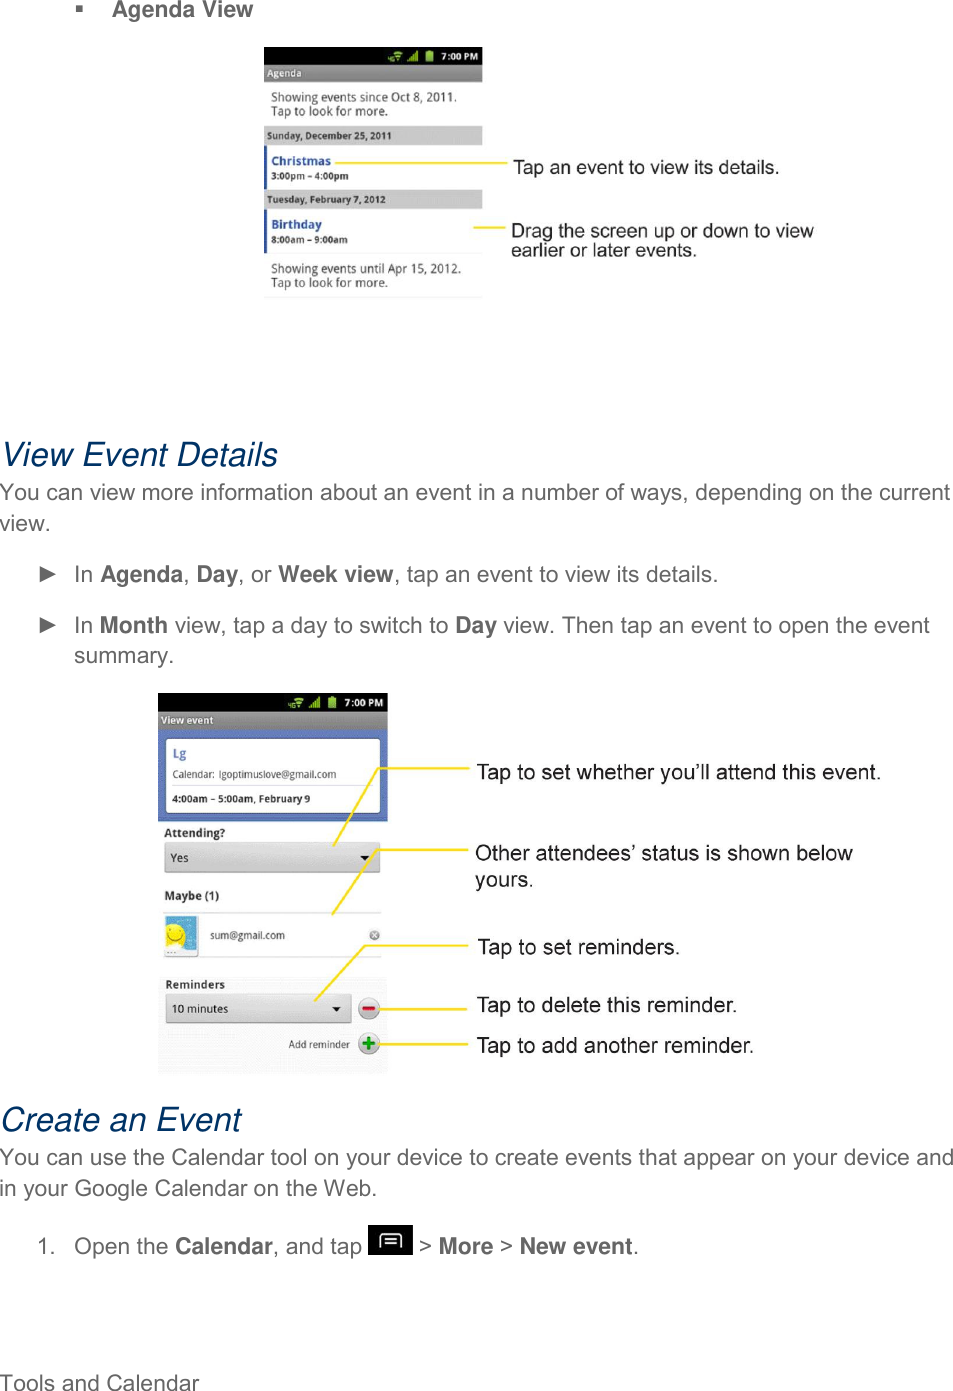  Tools and Calendar      Agenda View  View Event Details You can view more information about an event in a number of ways, depending on the current view. ►  In Agenda, Day, or Week view, tap an event to view its details. ►  In Month view, tap a day to switch to Day view. Then tap an event to open the event summary.  Create an Event You can use the Calendar tool on your device to create events that appear on your device and in your Google Calendar on the Web. 1.  Open the Calendar, and tap   &gt; More &gt; New event. 